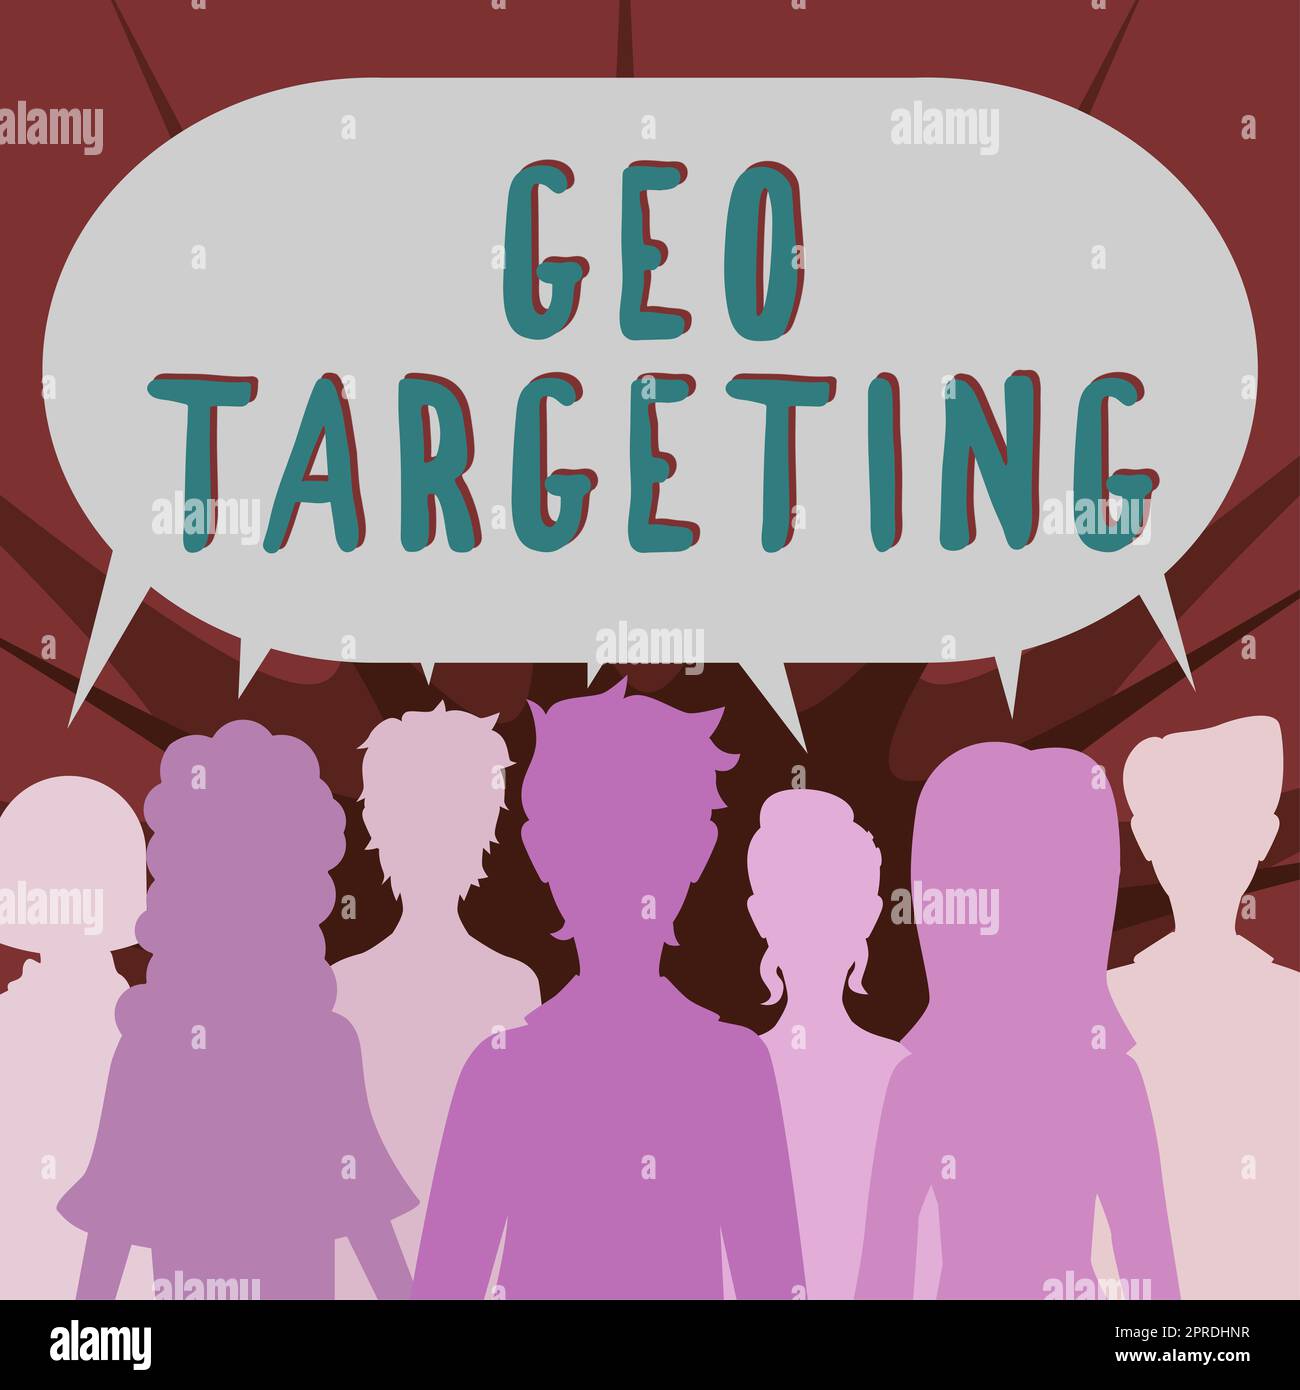 Inspiration showing sign Geo Targeting. Business overview Digital Ads Views IP Address Adwords Campaigns Location Group Of People Sharing Important Informations In Speech Bubble. Stock Photo